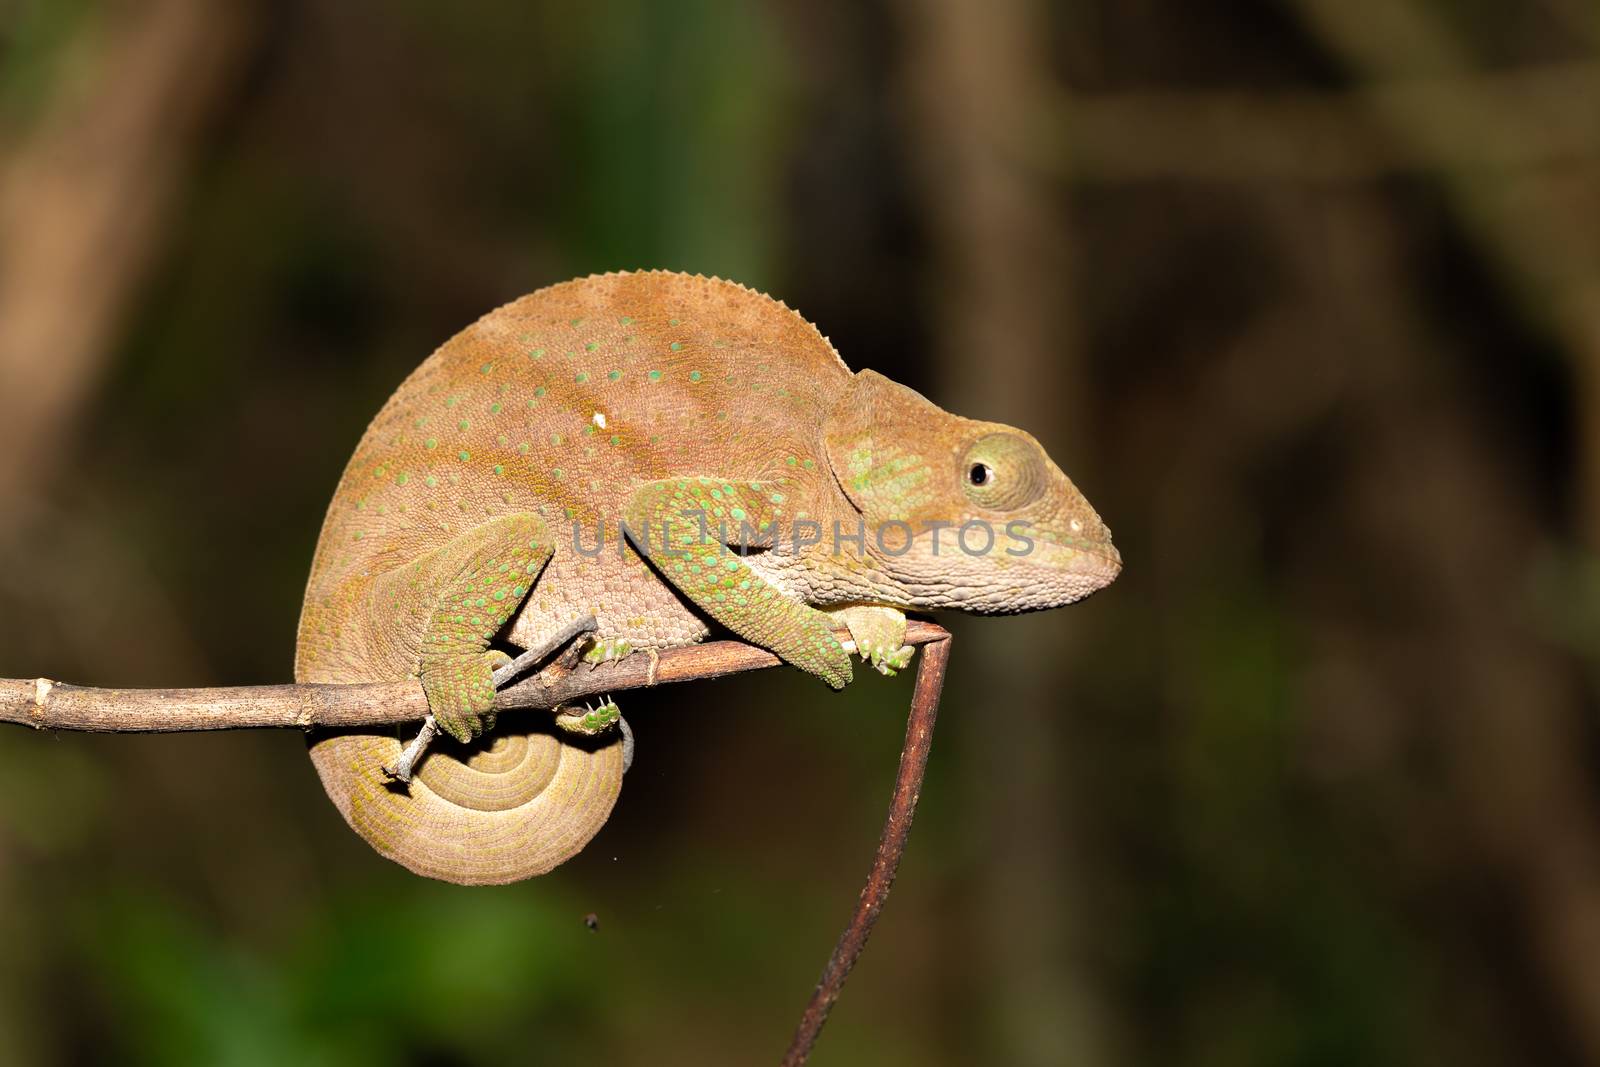 Colorful chameleon in a close-up in the rainforest in Madagascar by 25ehaag6